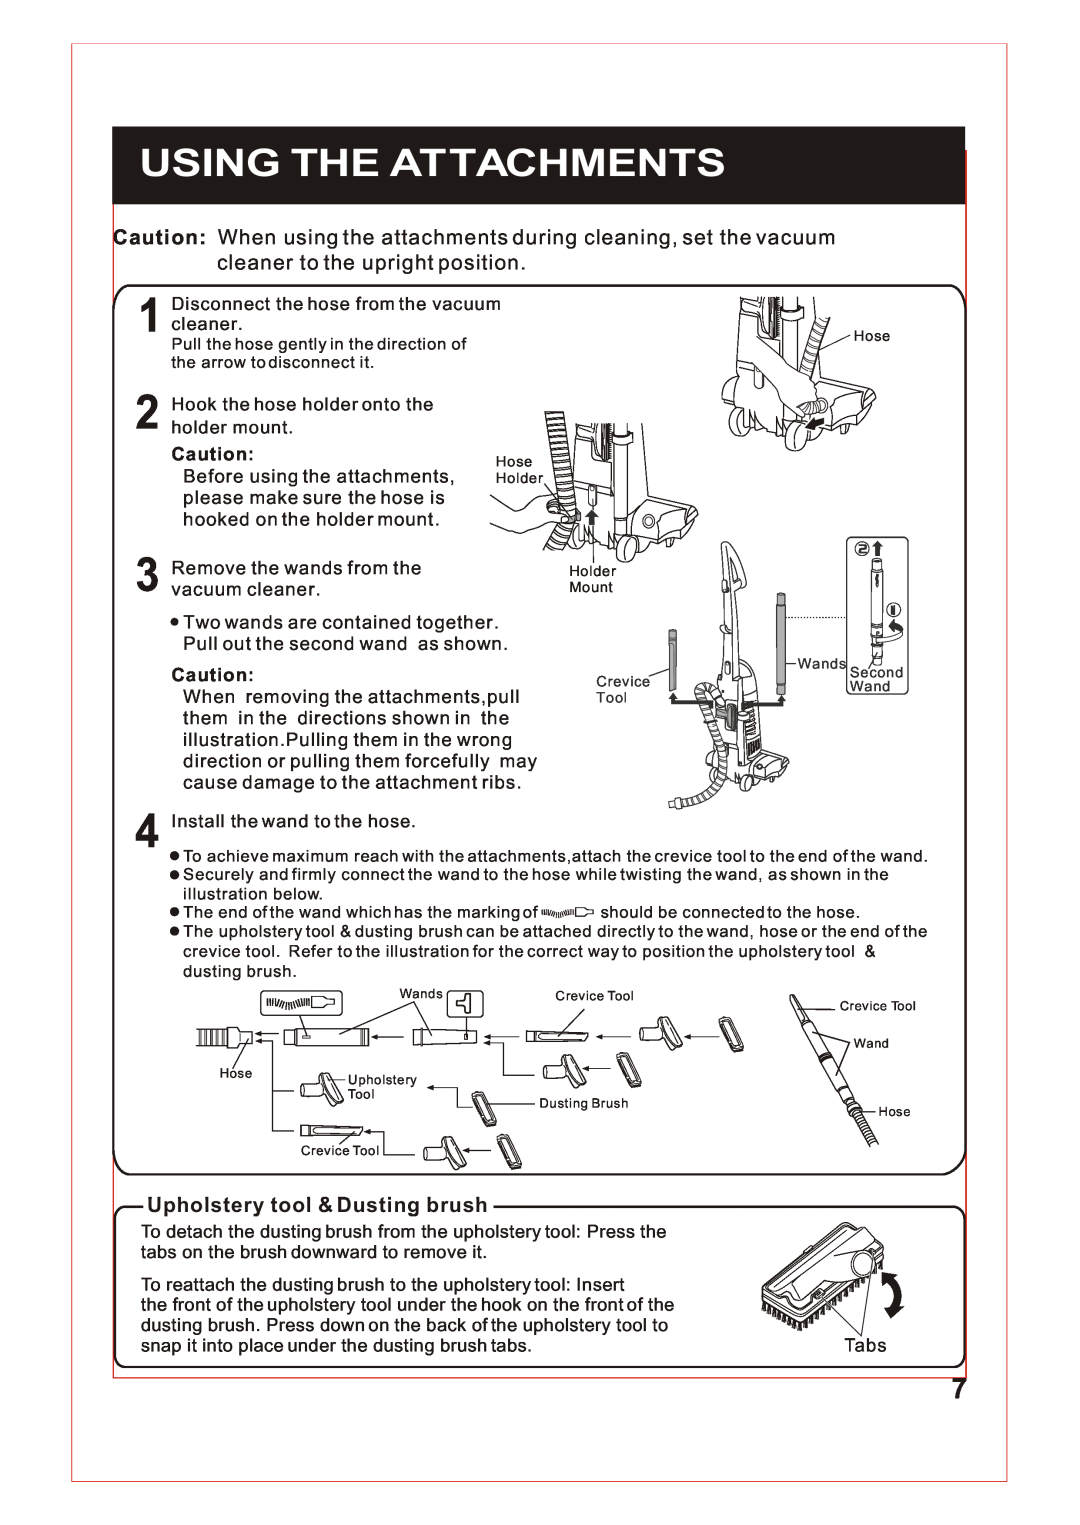 Fantom Vacuum FM740 B instruction manual Using The Attachments, Upholstery tool & Dusting brush 